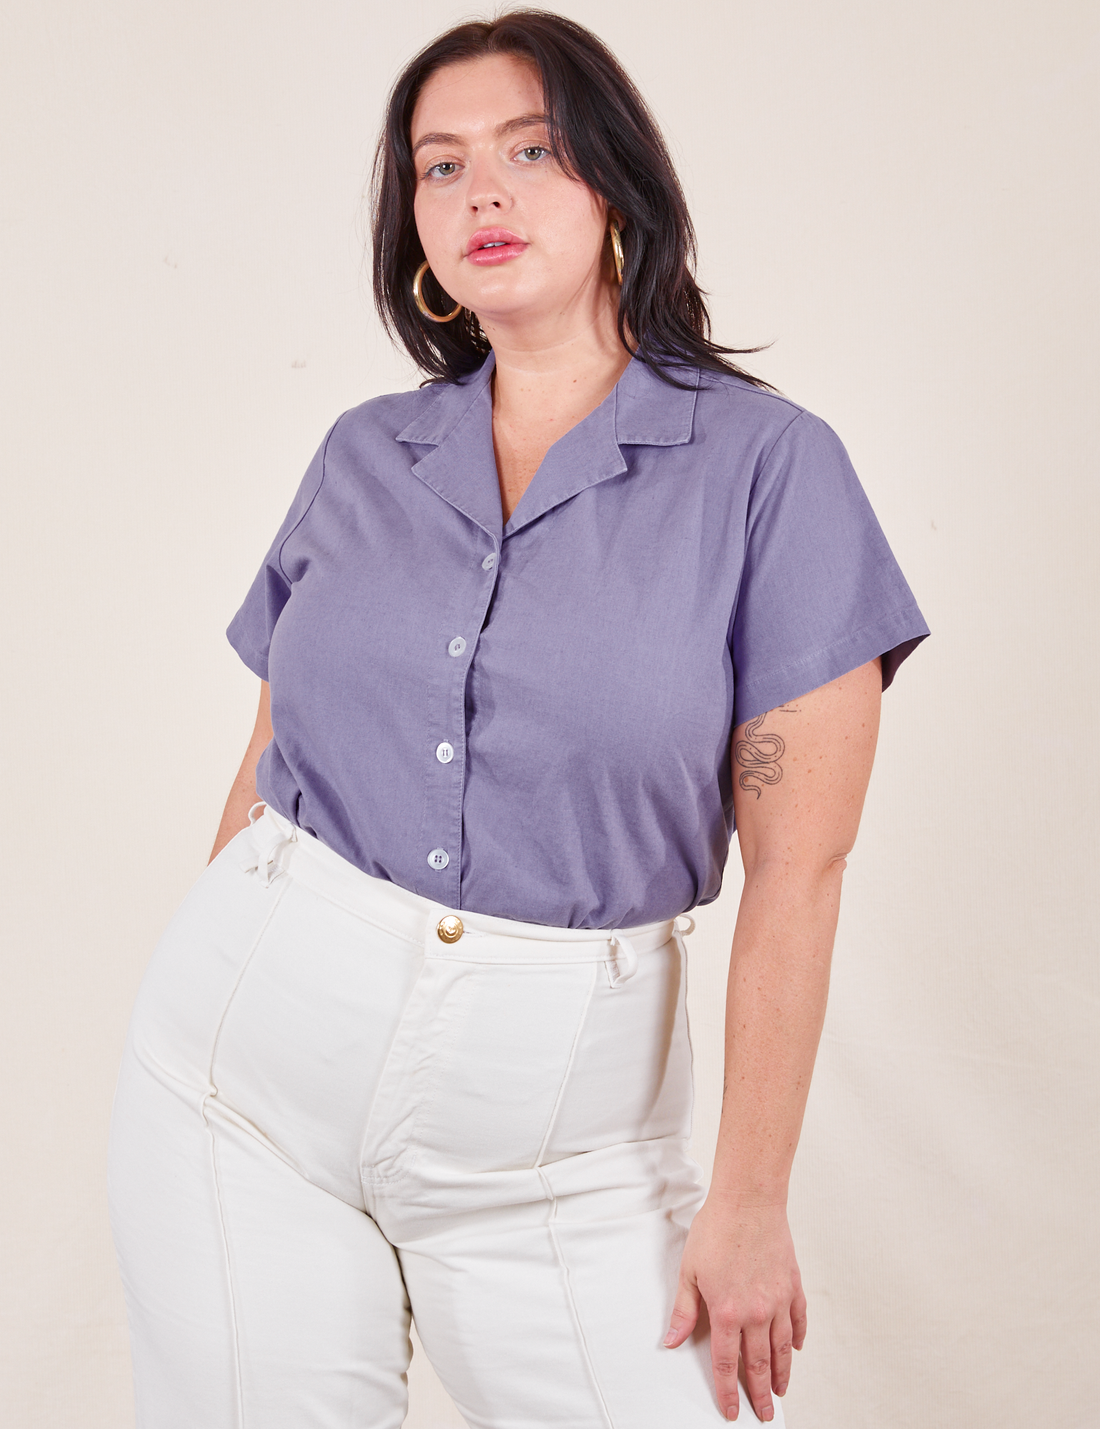 Faye is wearing Pantry Button-Up in Faded Grape tucked into vintage off-white Western Pants